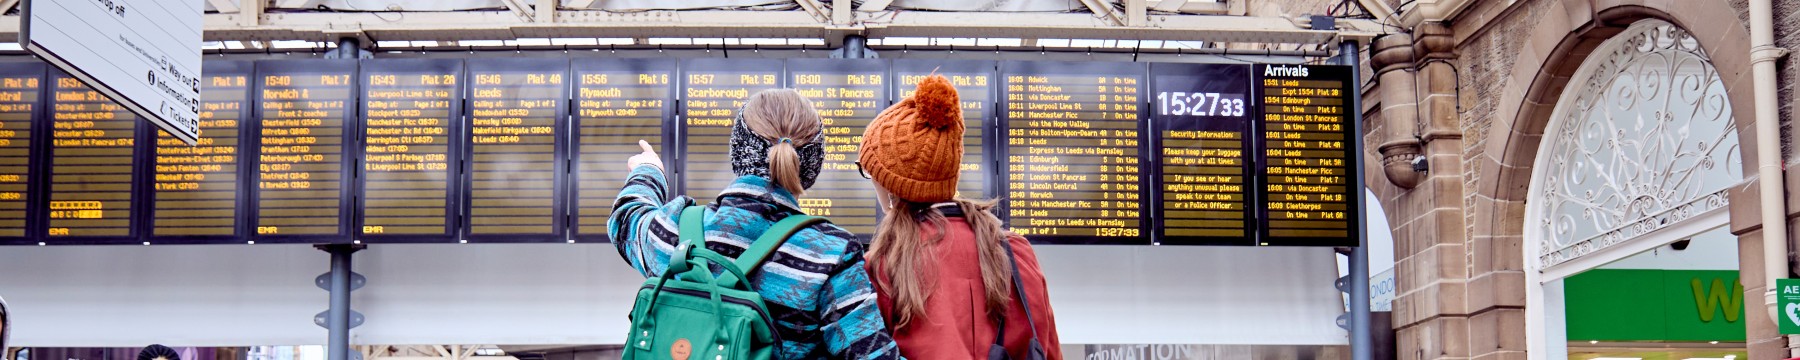 Two passengers pointing at the information boards